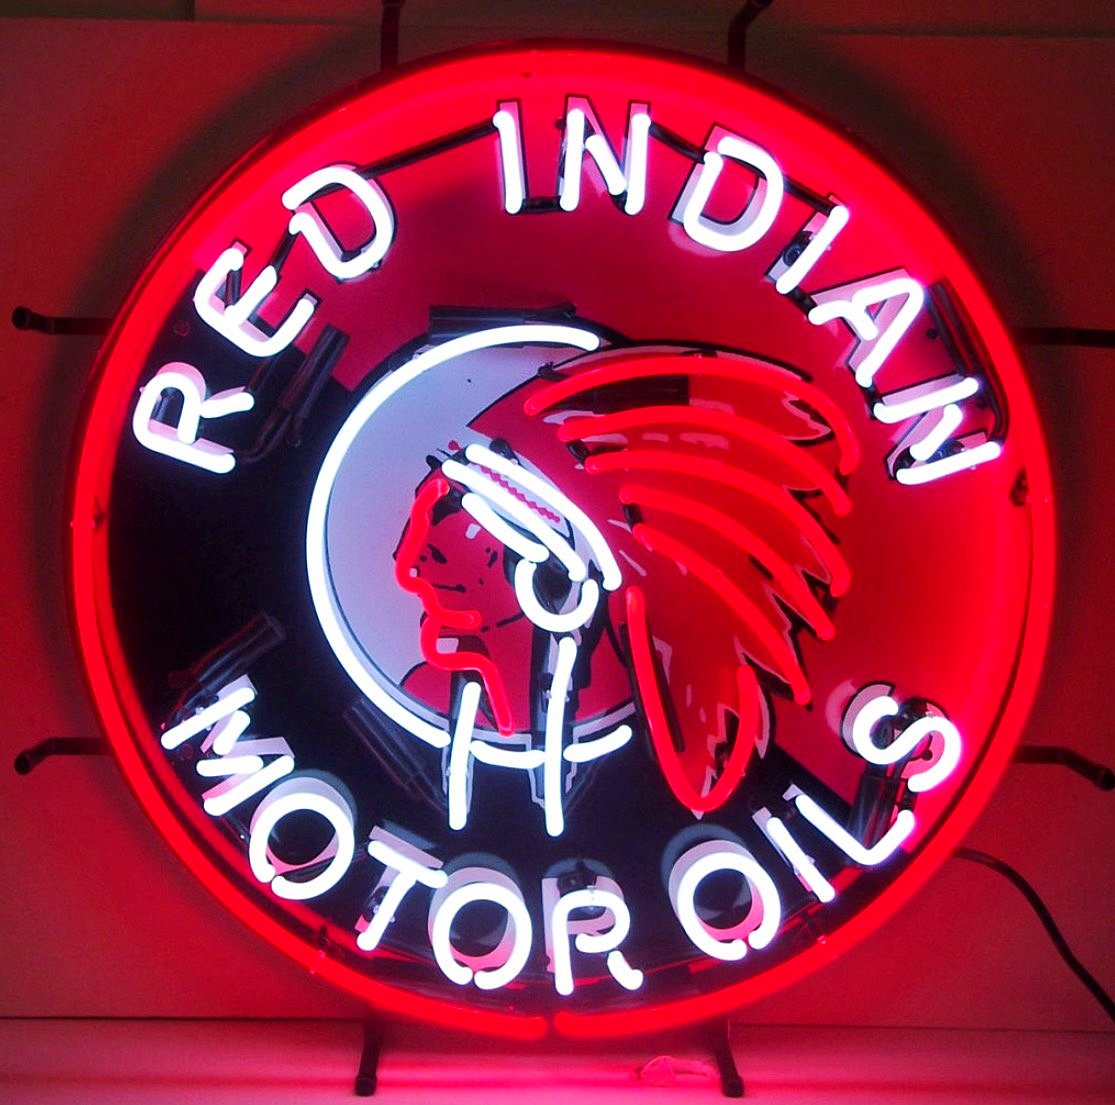 Red Indian Motor Oil Neon Sign